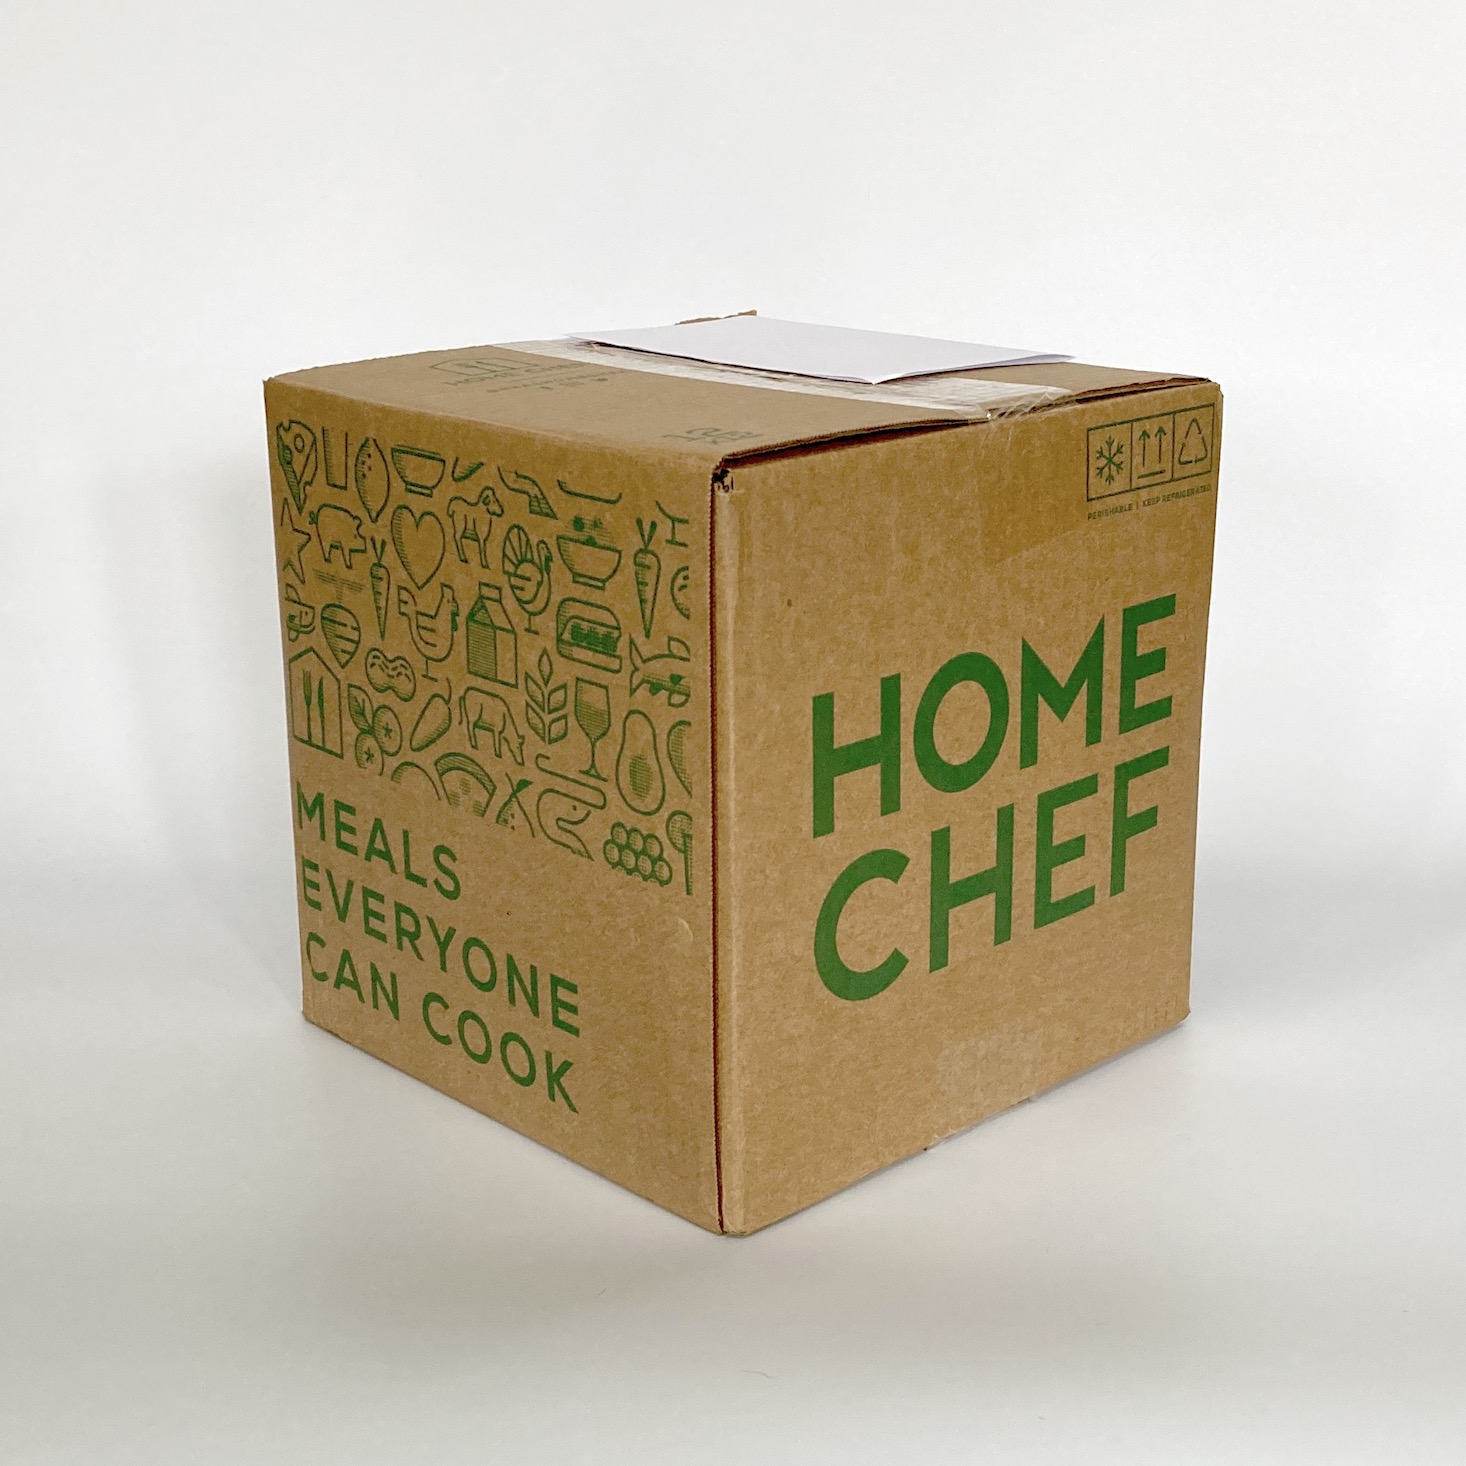 Home Chef Meal Kit Review Review + Coupon – December 2020